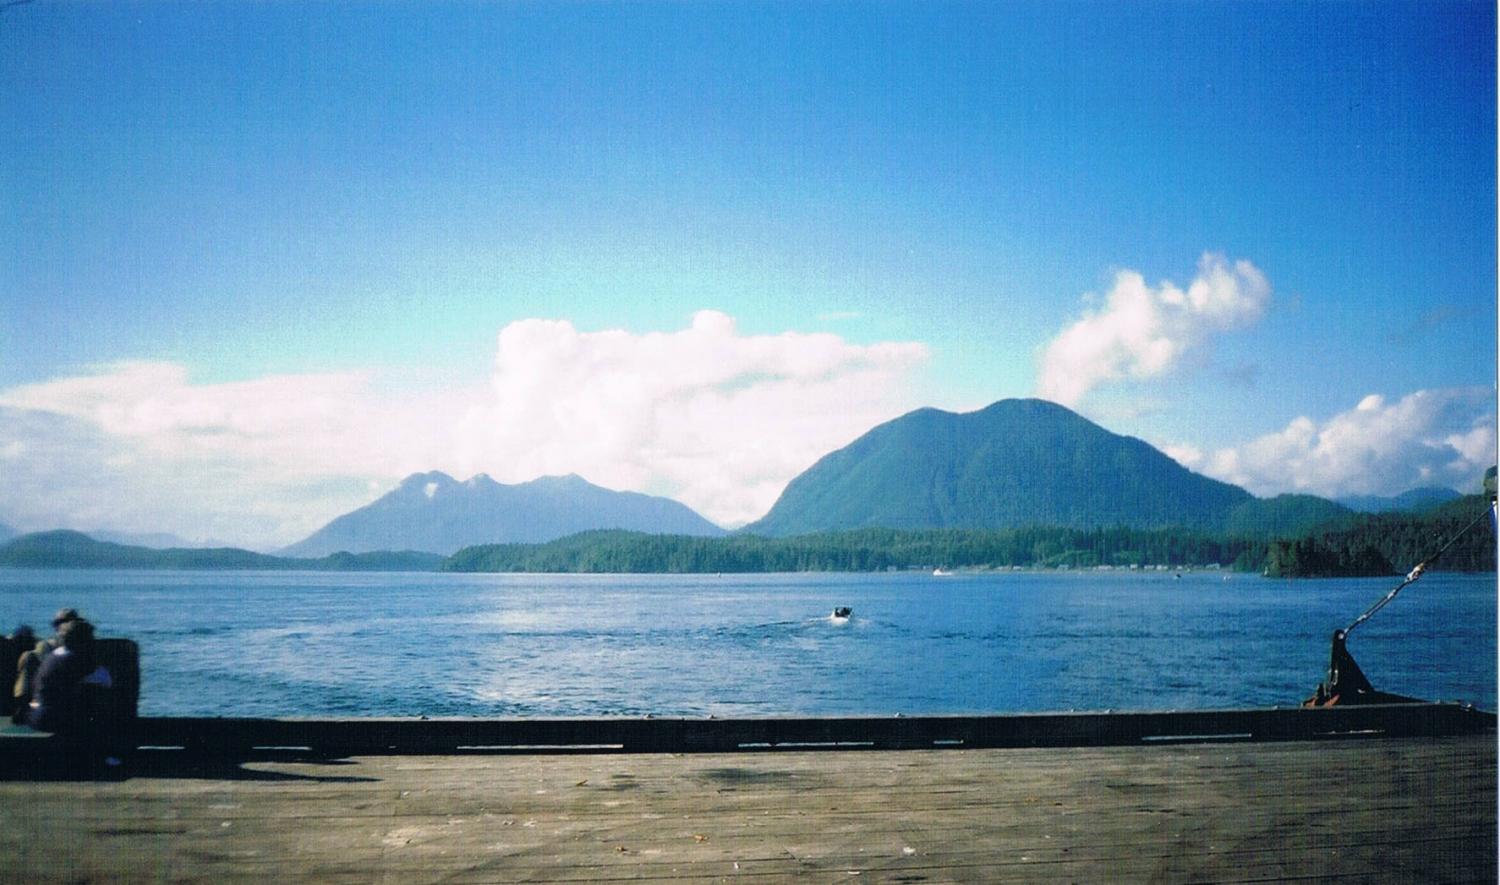 Meares Island from Tofino